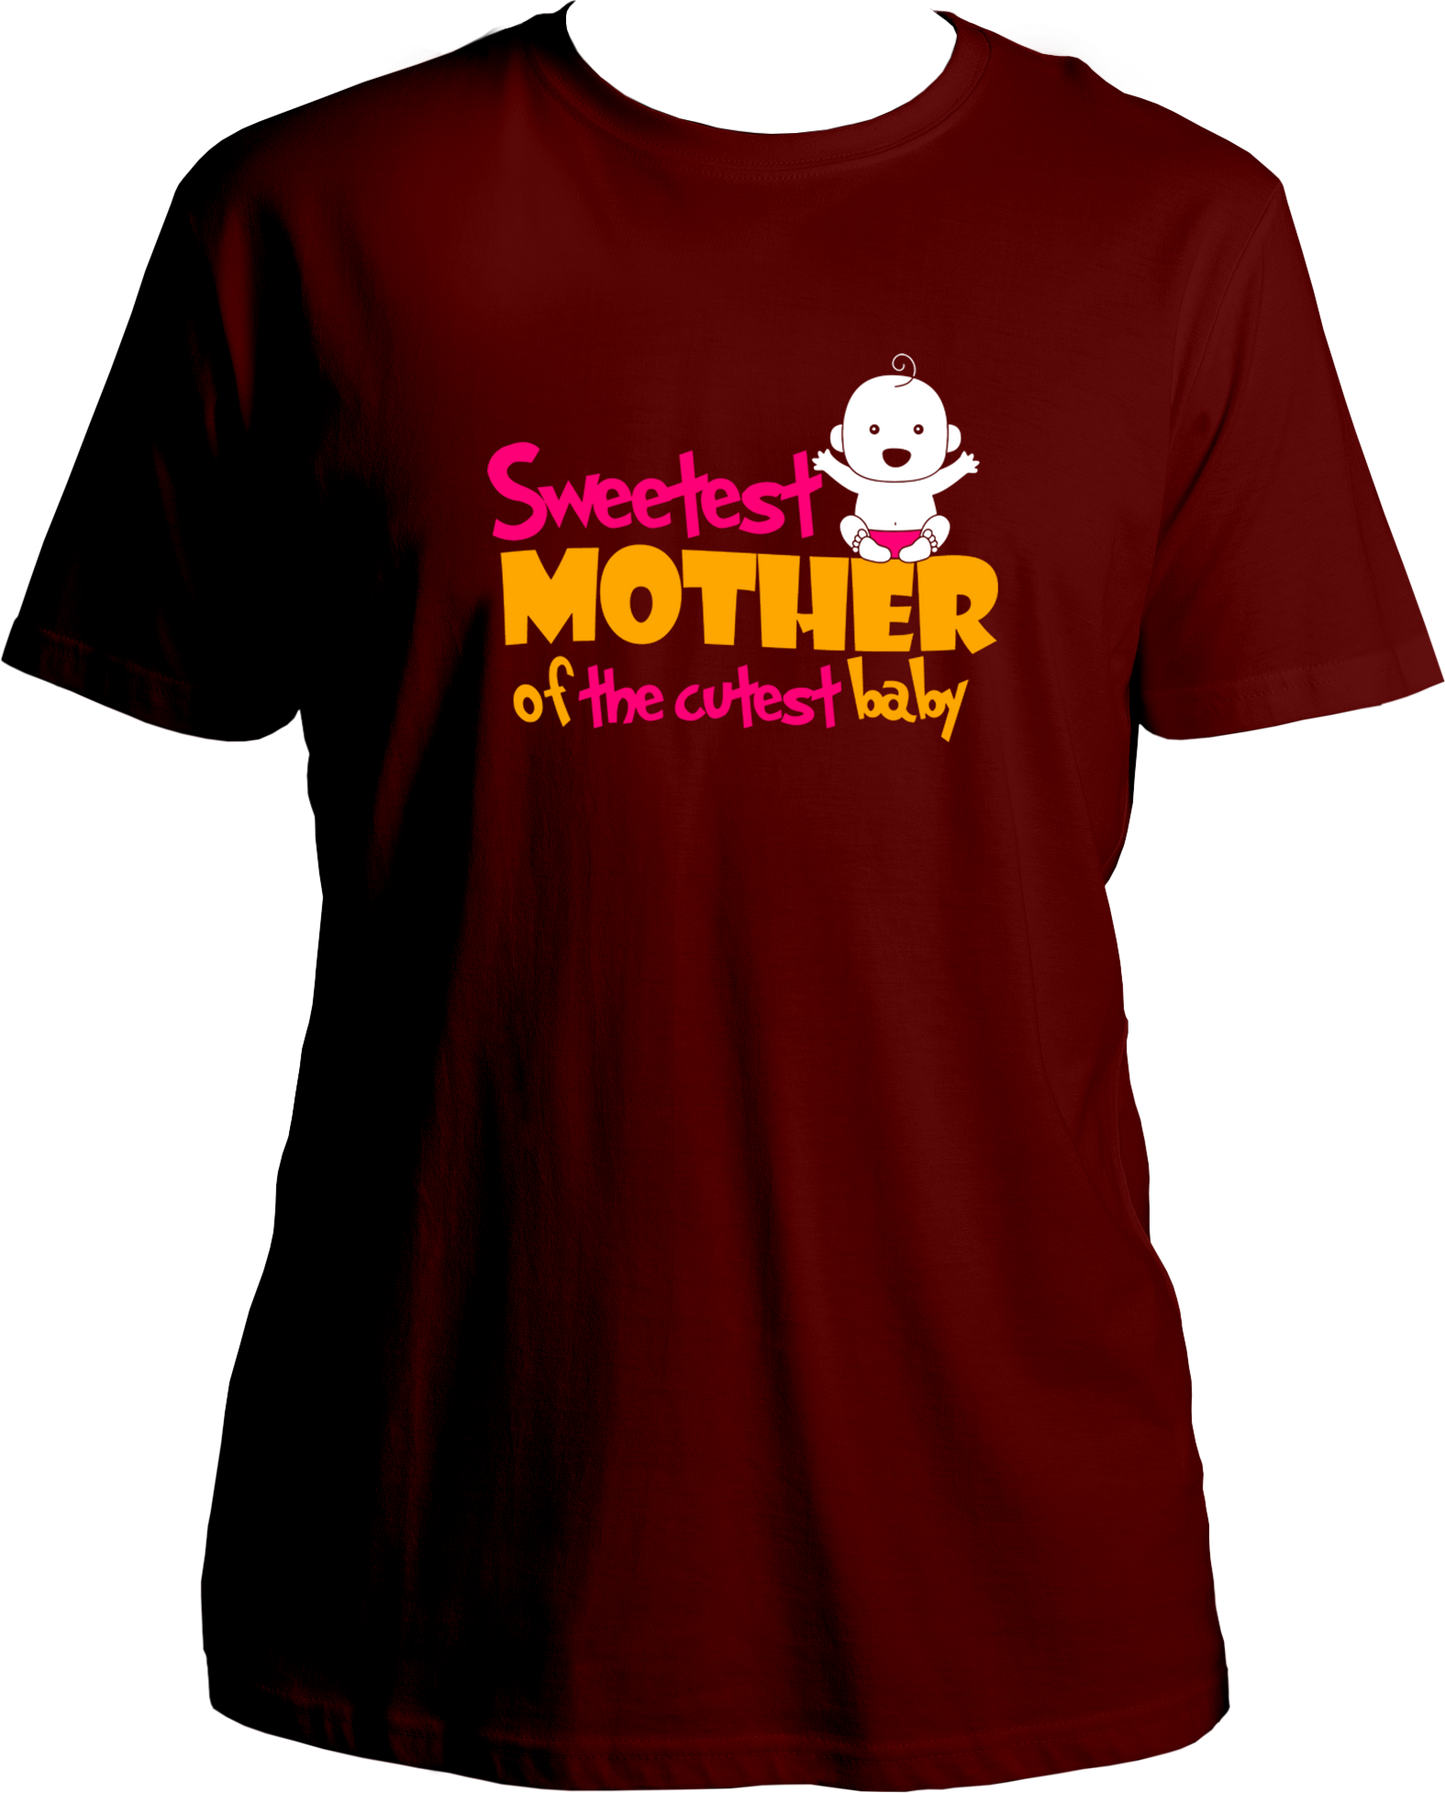 Celebrate the special bond between mother and child with this exclusive Sweetest Mother Of Cutest Baby Unisex T-Shirt. This sophisticated design is the perfect way to honor the beauty and resilience of motherhood. Crafted from the highest quality materials and adorned with an elegant tribute to mothers everywhere, this stylish tee will become your go-to for celebrating the joy of motherhood.